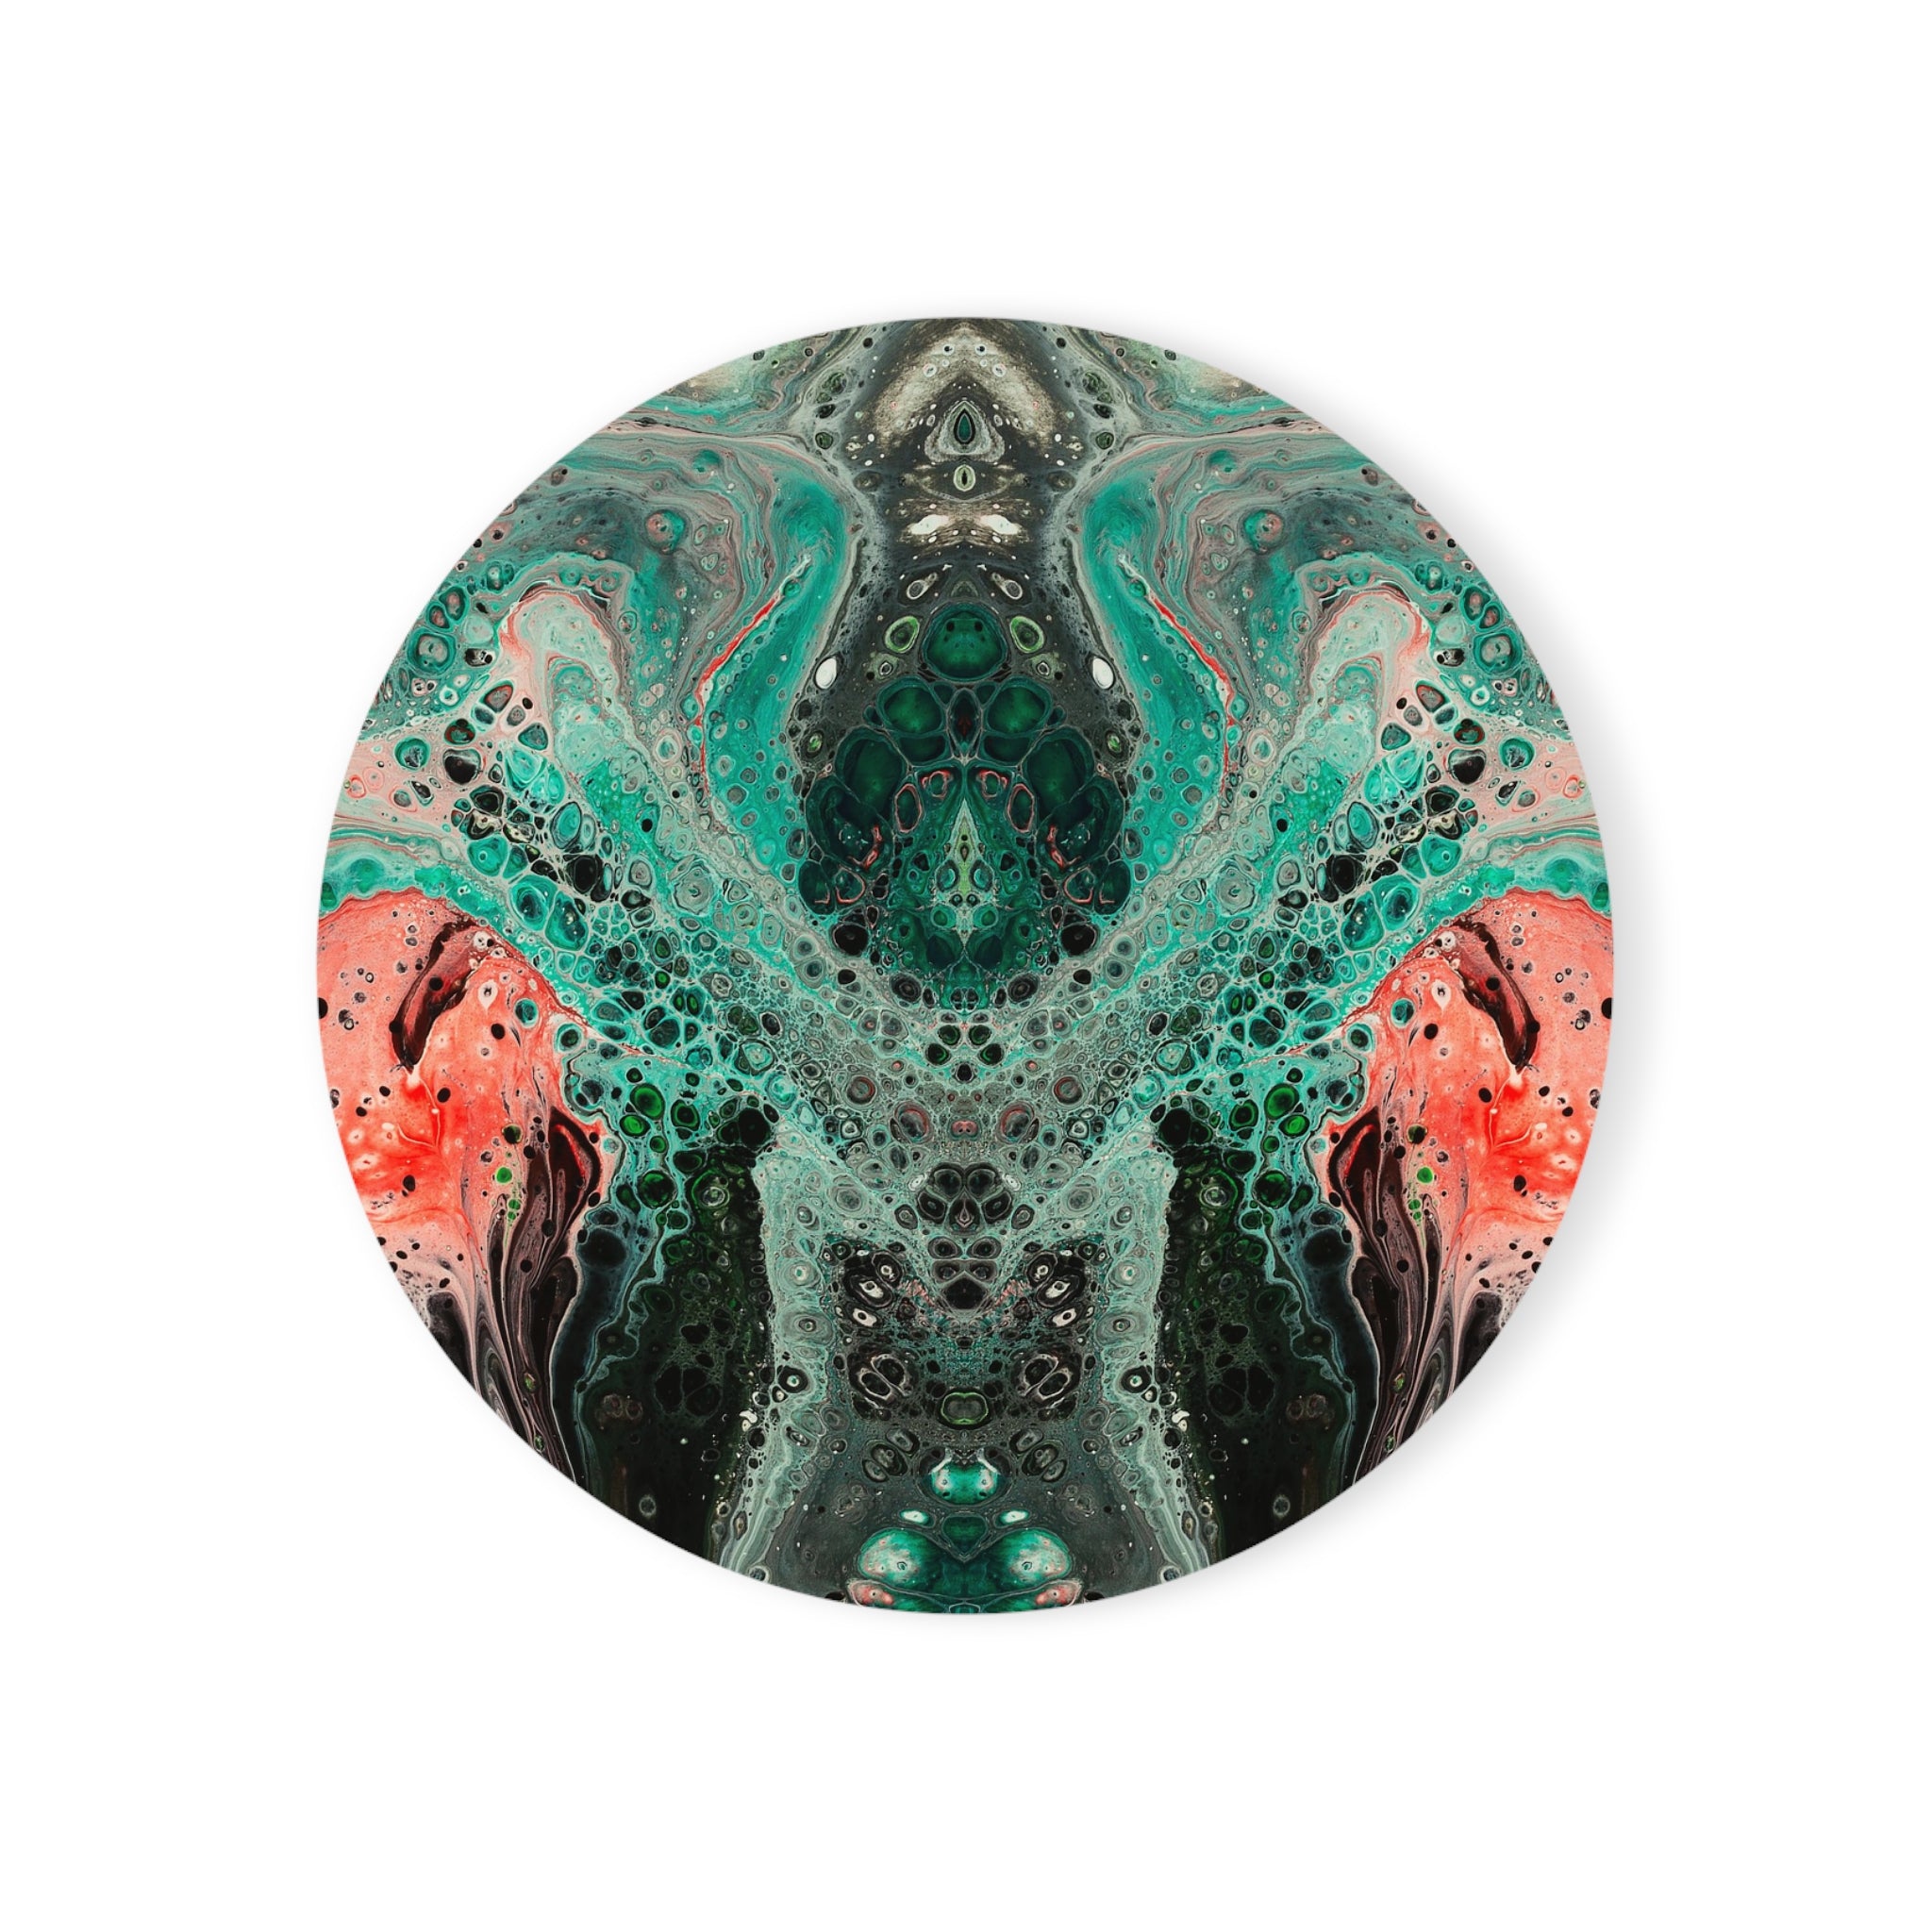 Cameron Creations - Funky Fish - Stylish Coffee Coaster - Circle Front